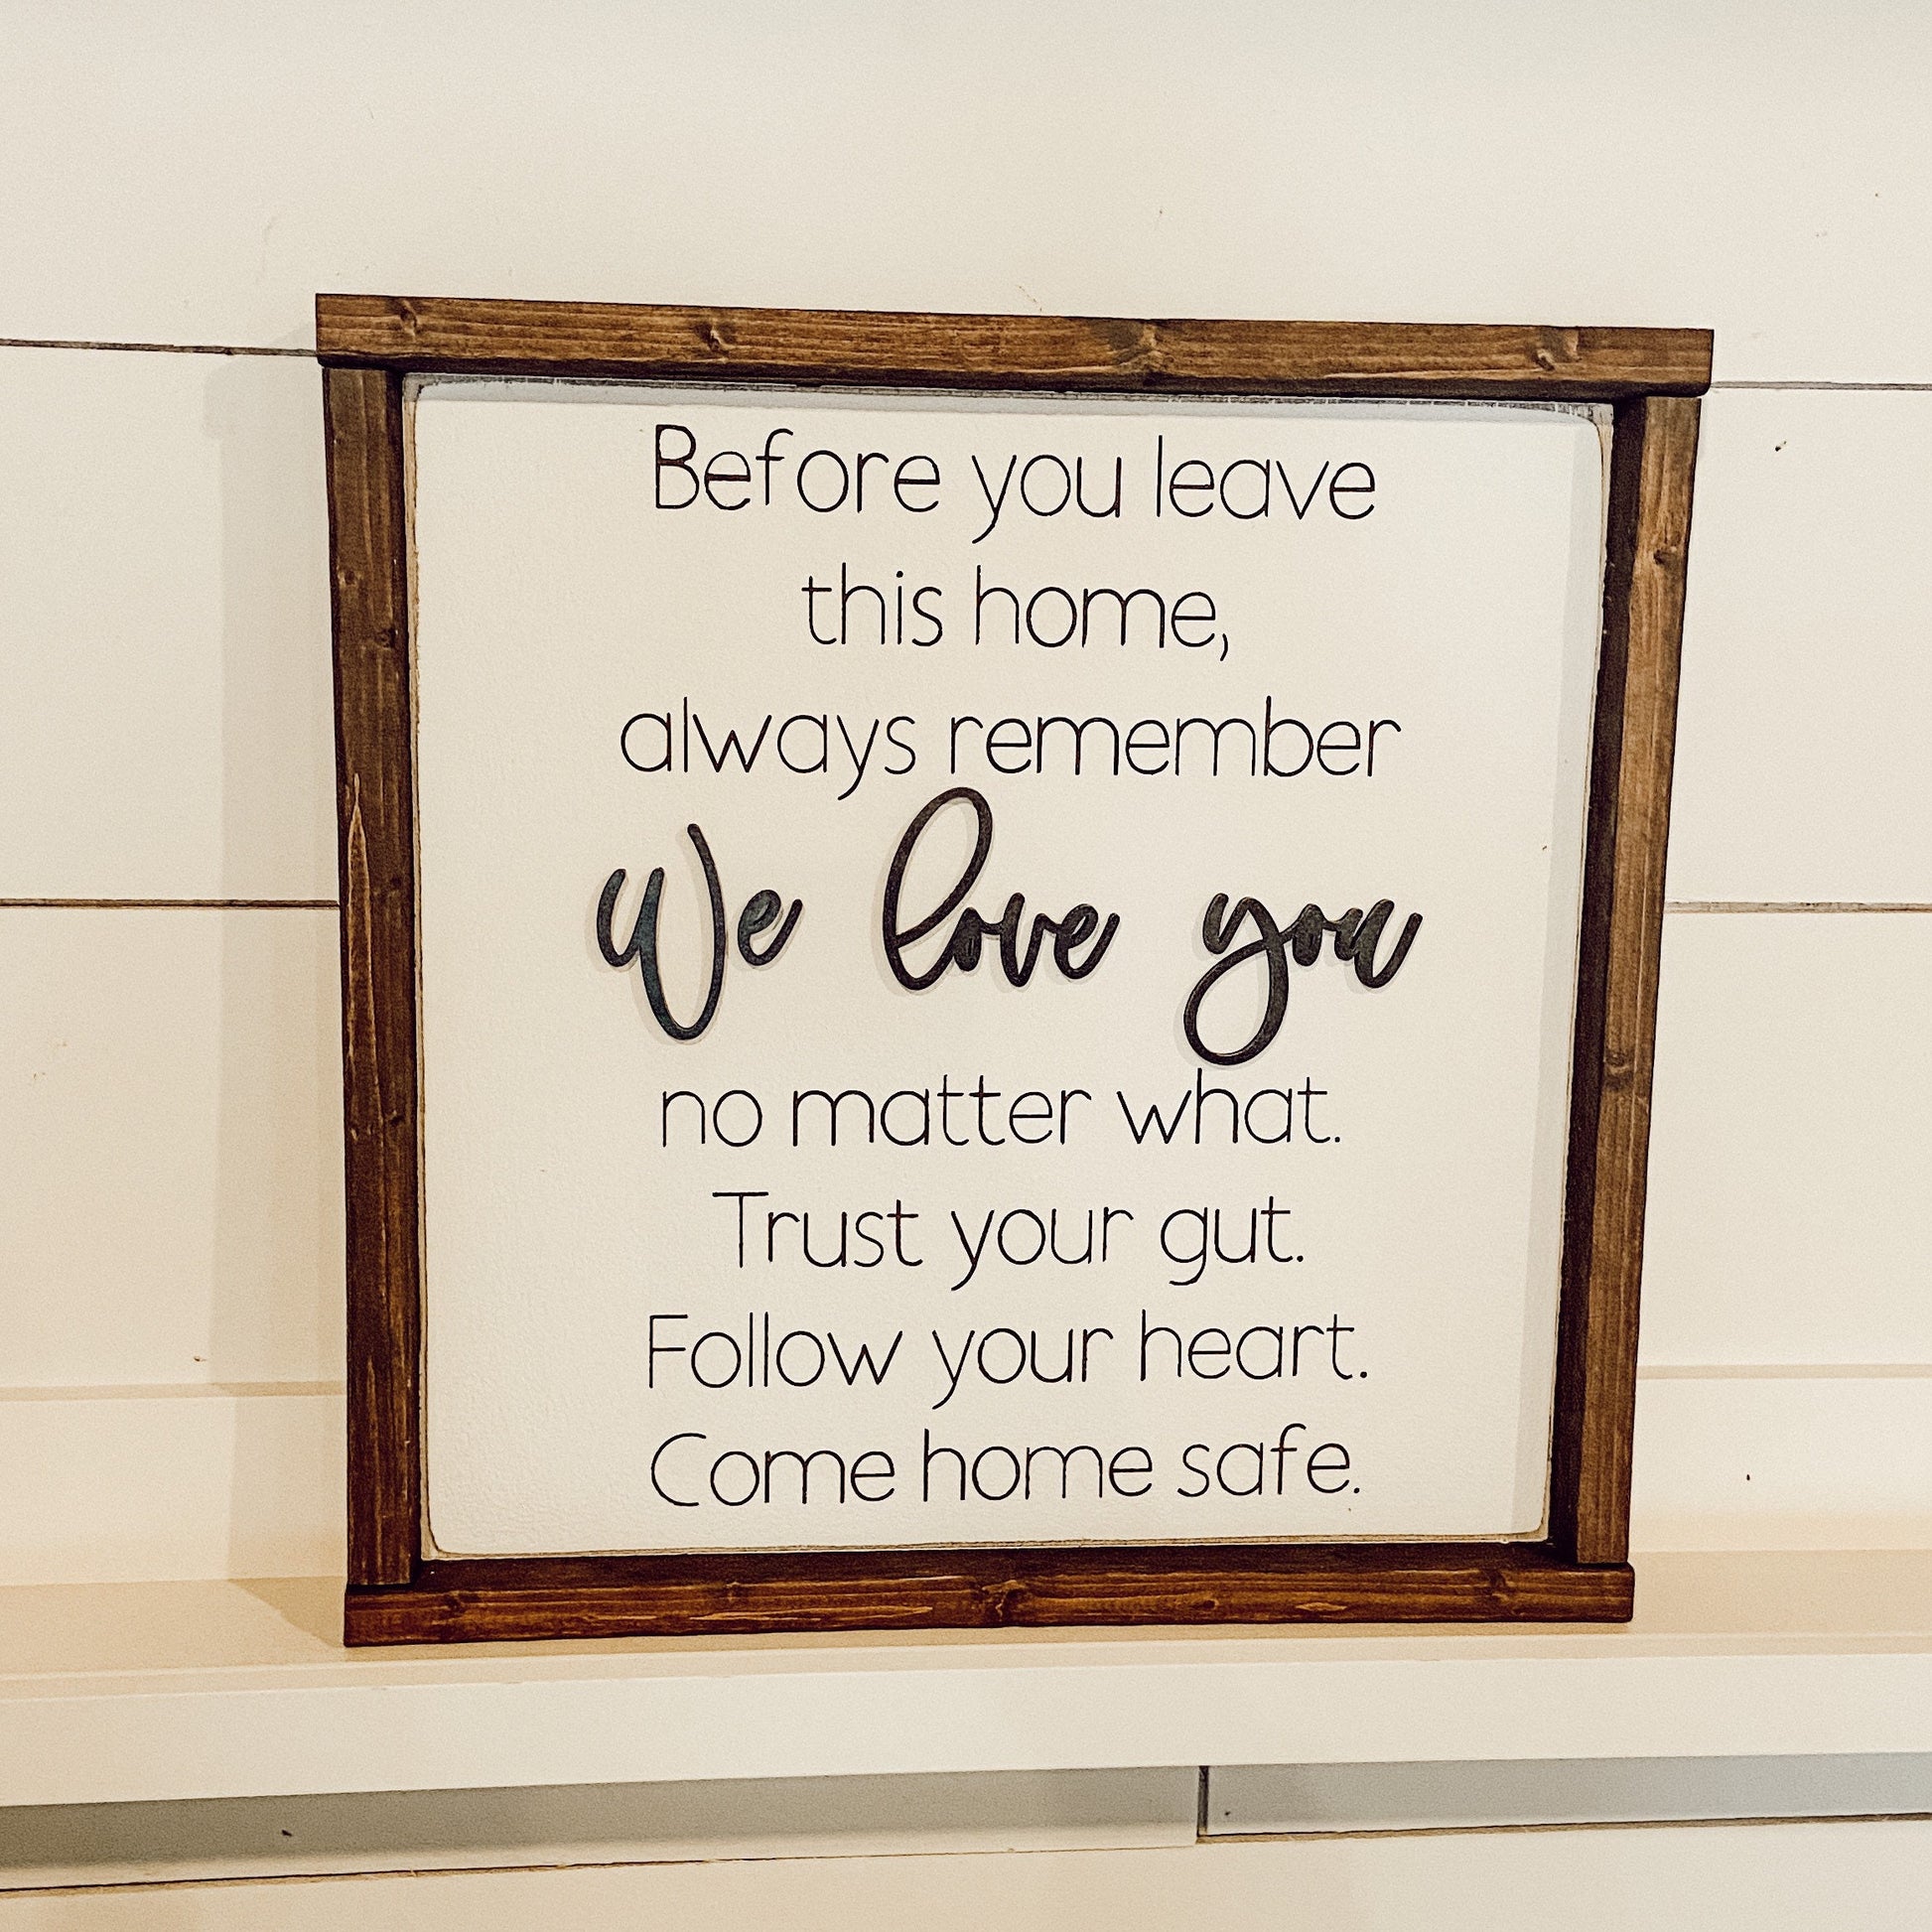 before you leave this home - entryway decor - sign for kids and essential workers [FREE SHIPPING!]